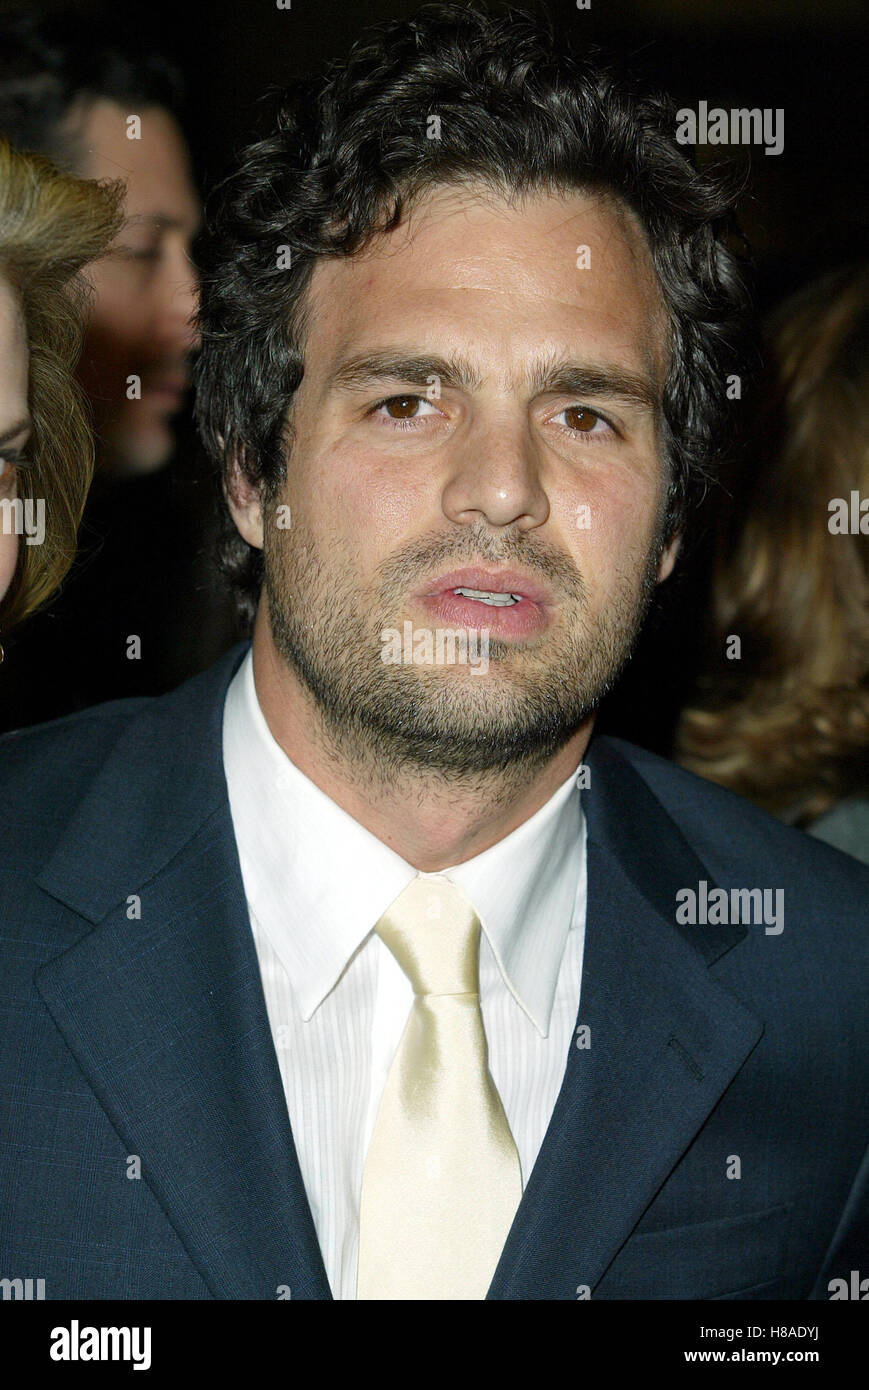 MARK RUFFALO IN THE CUT  LA FILM PREMIERE ACADEMY OF MOTION PICTURES BEVERLY HILLS LA USA 16 October 2003 Stock Photo